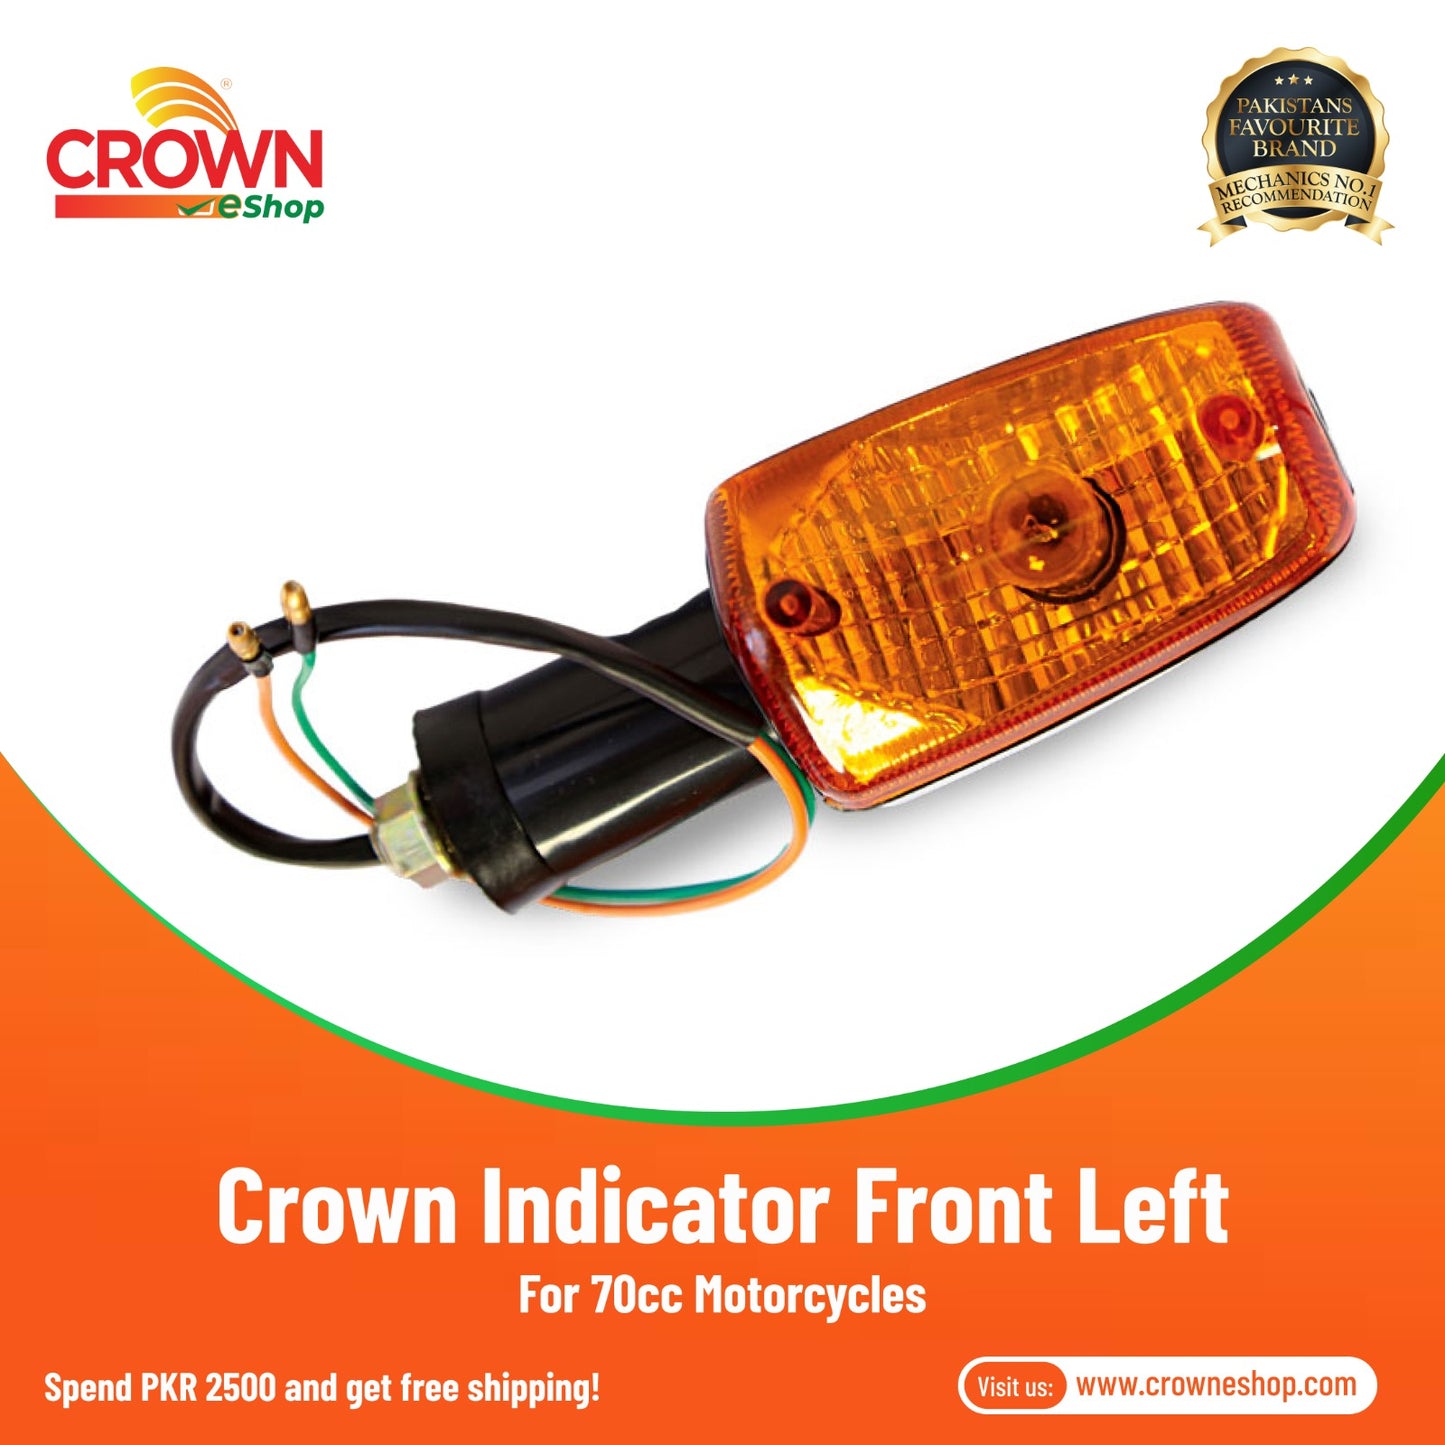 Crown Indicator Front Left for 70cc Motorcycles - Crowneshop